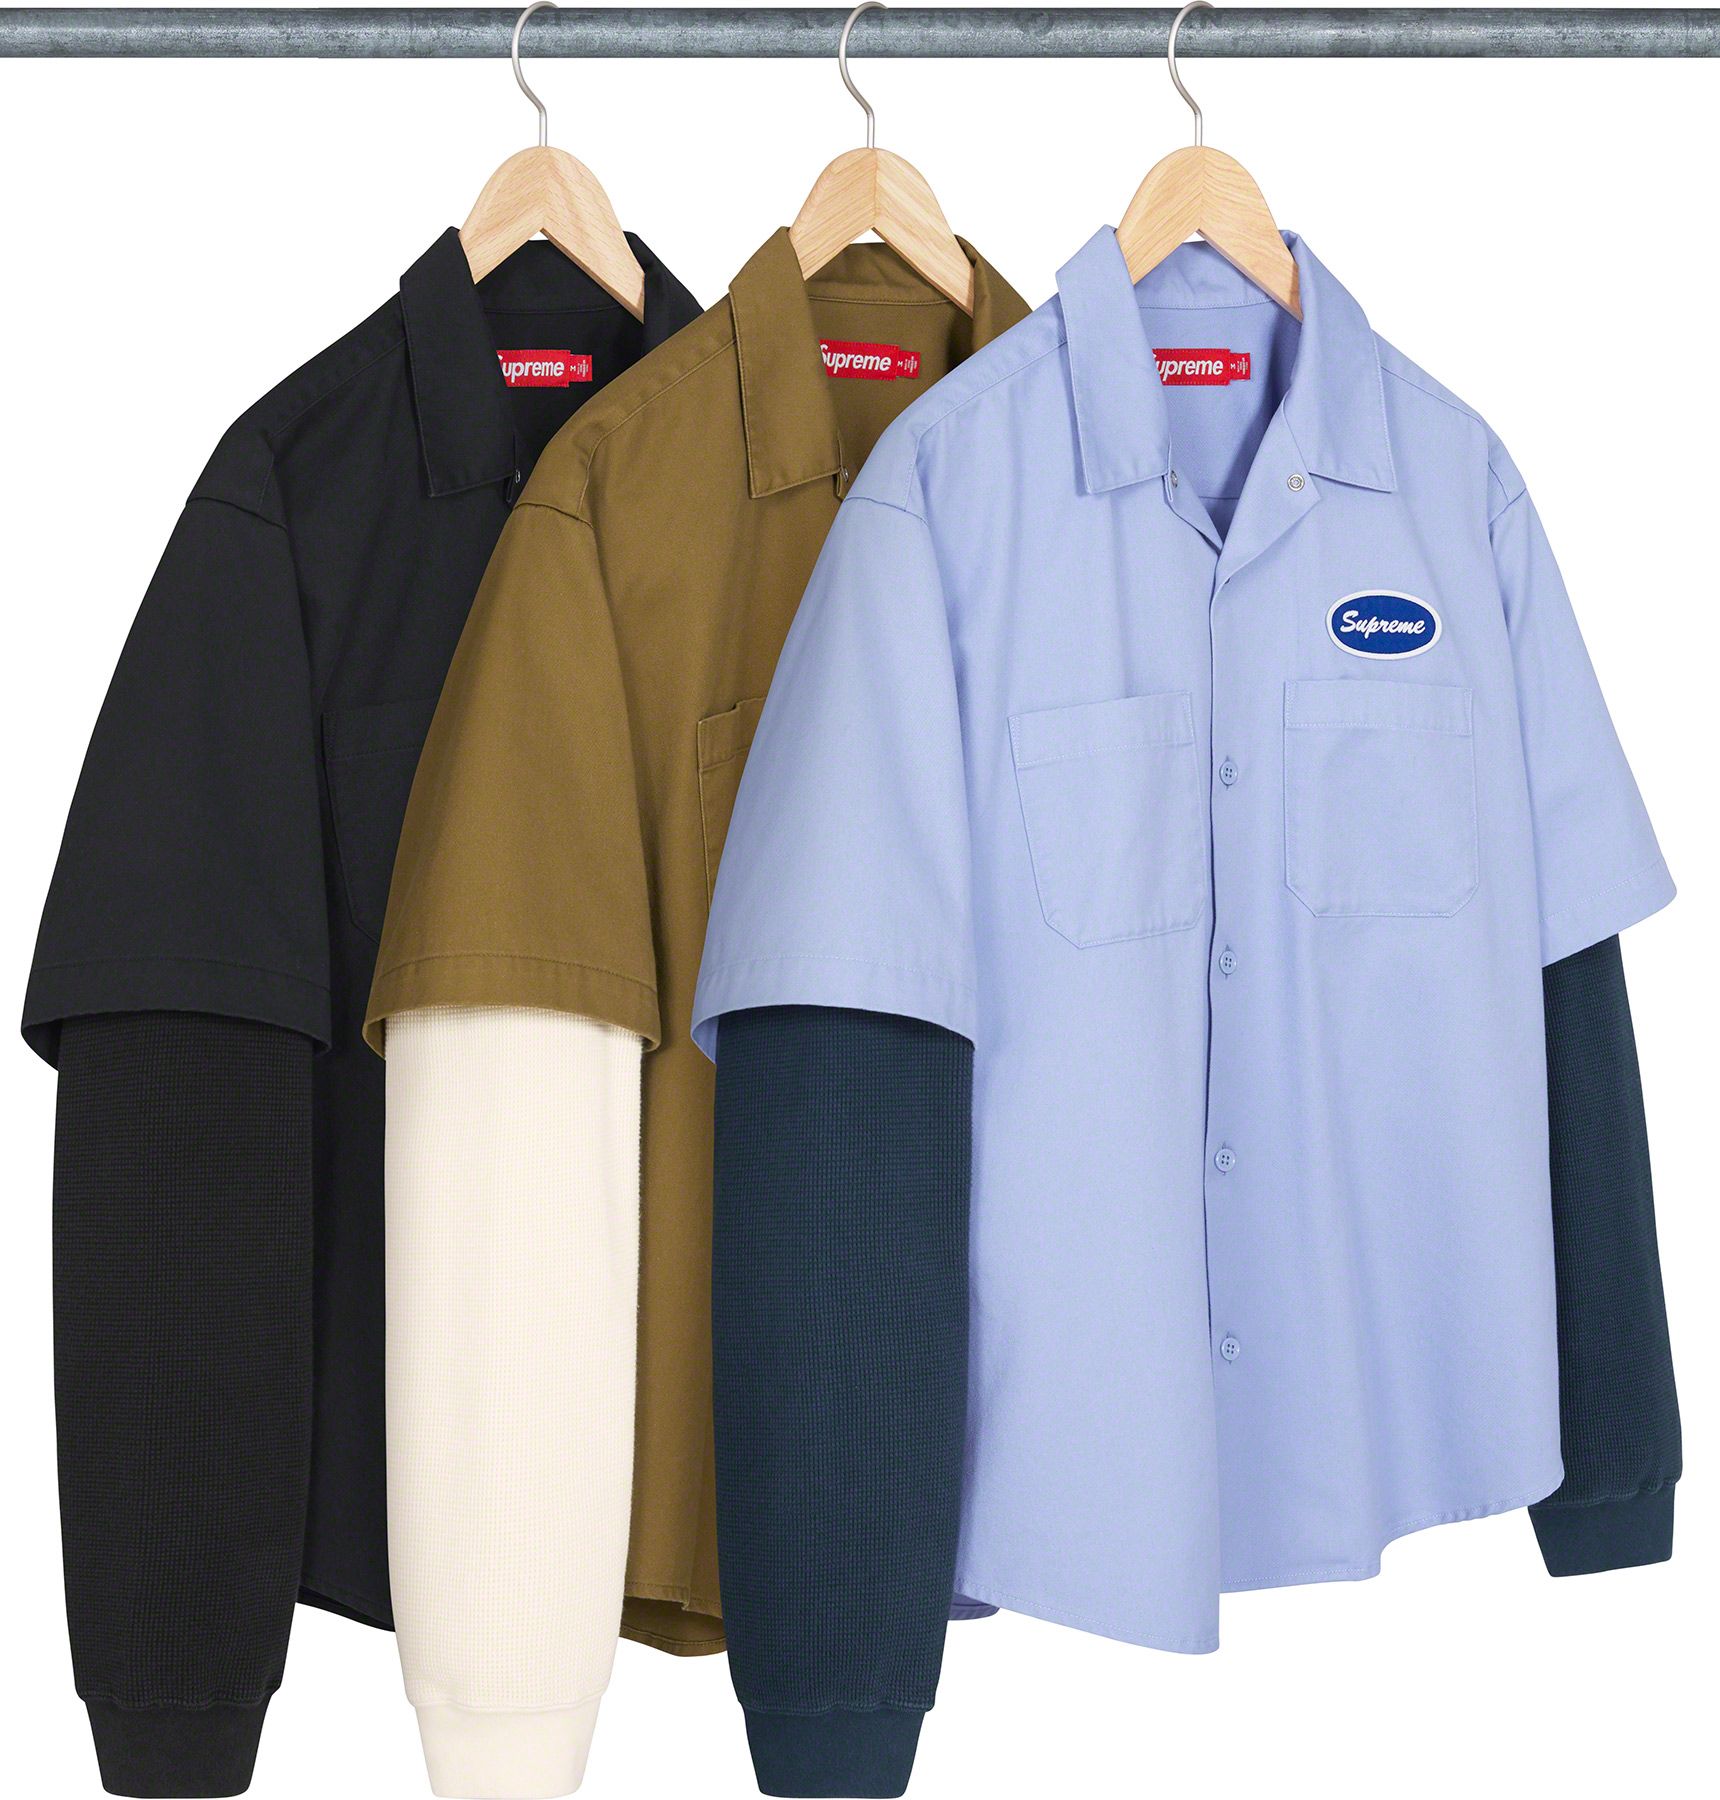 Thermal Sleeve Work Shirt - Fall/Winter 2023 Preview – Supreme